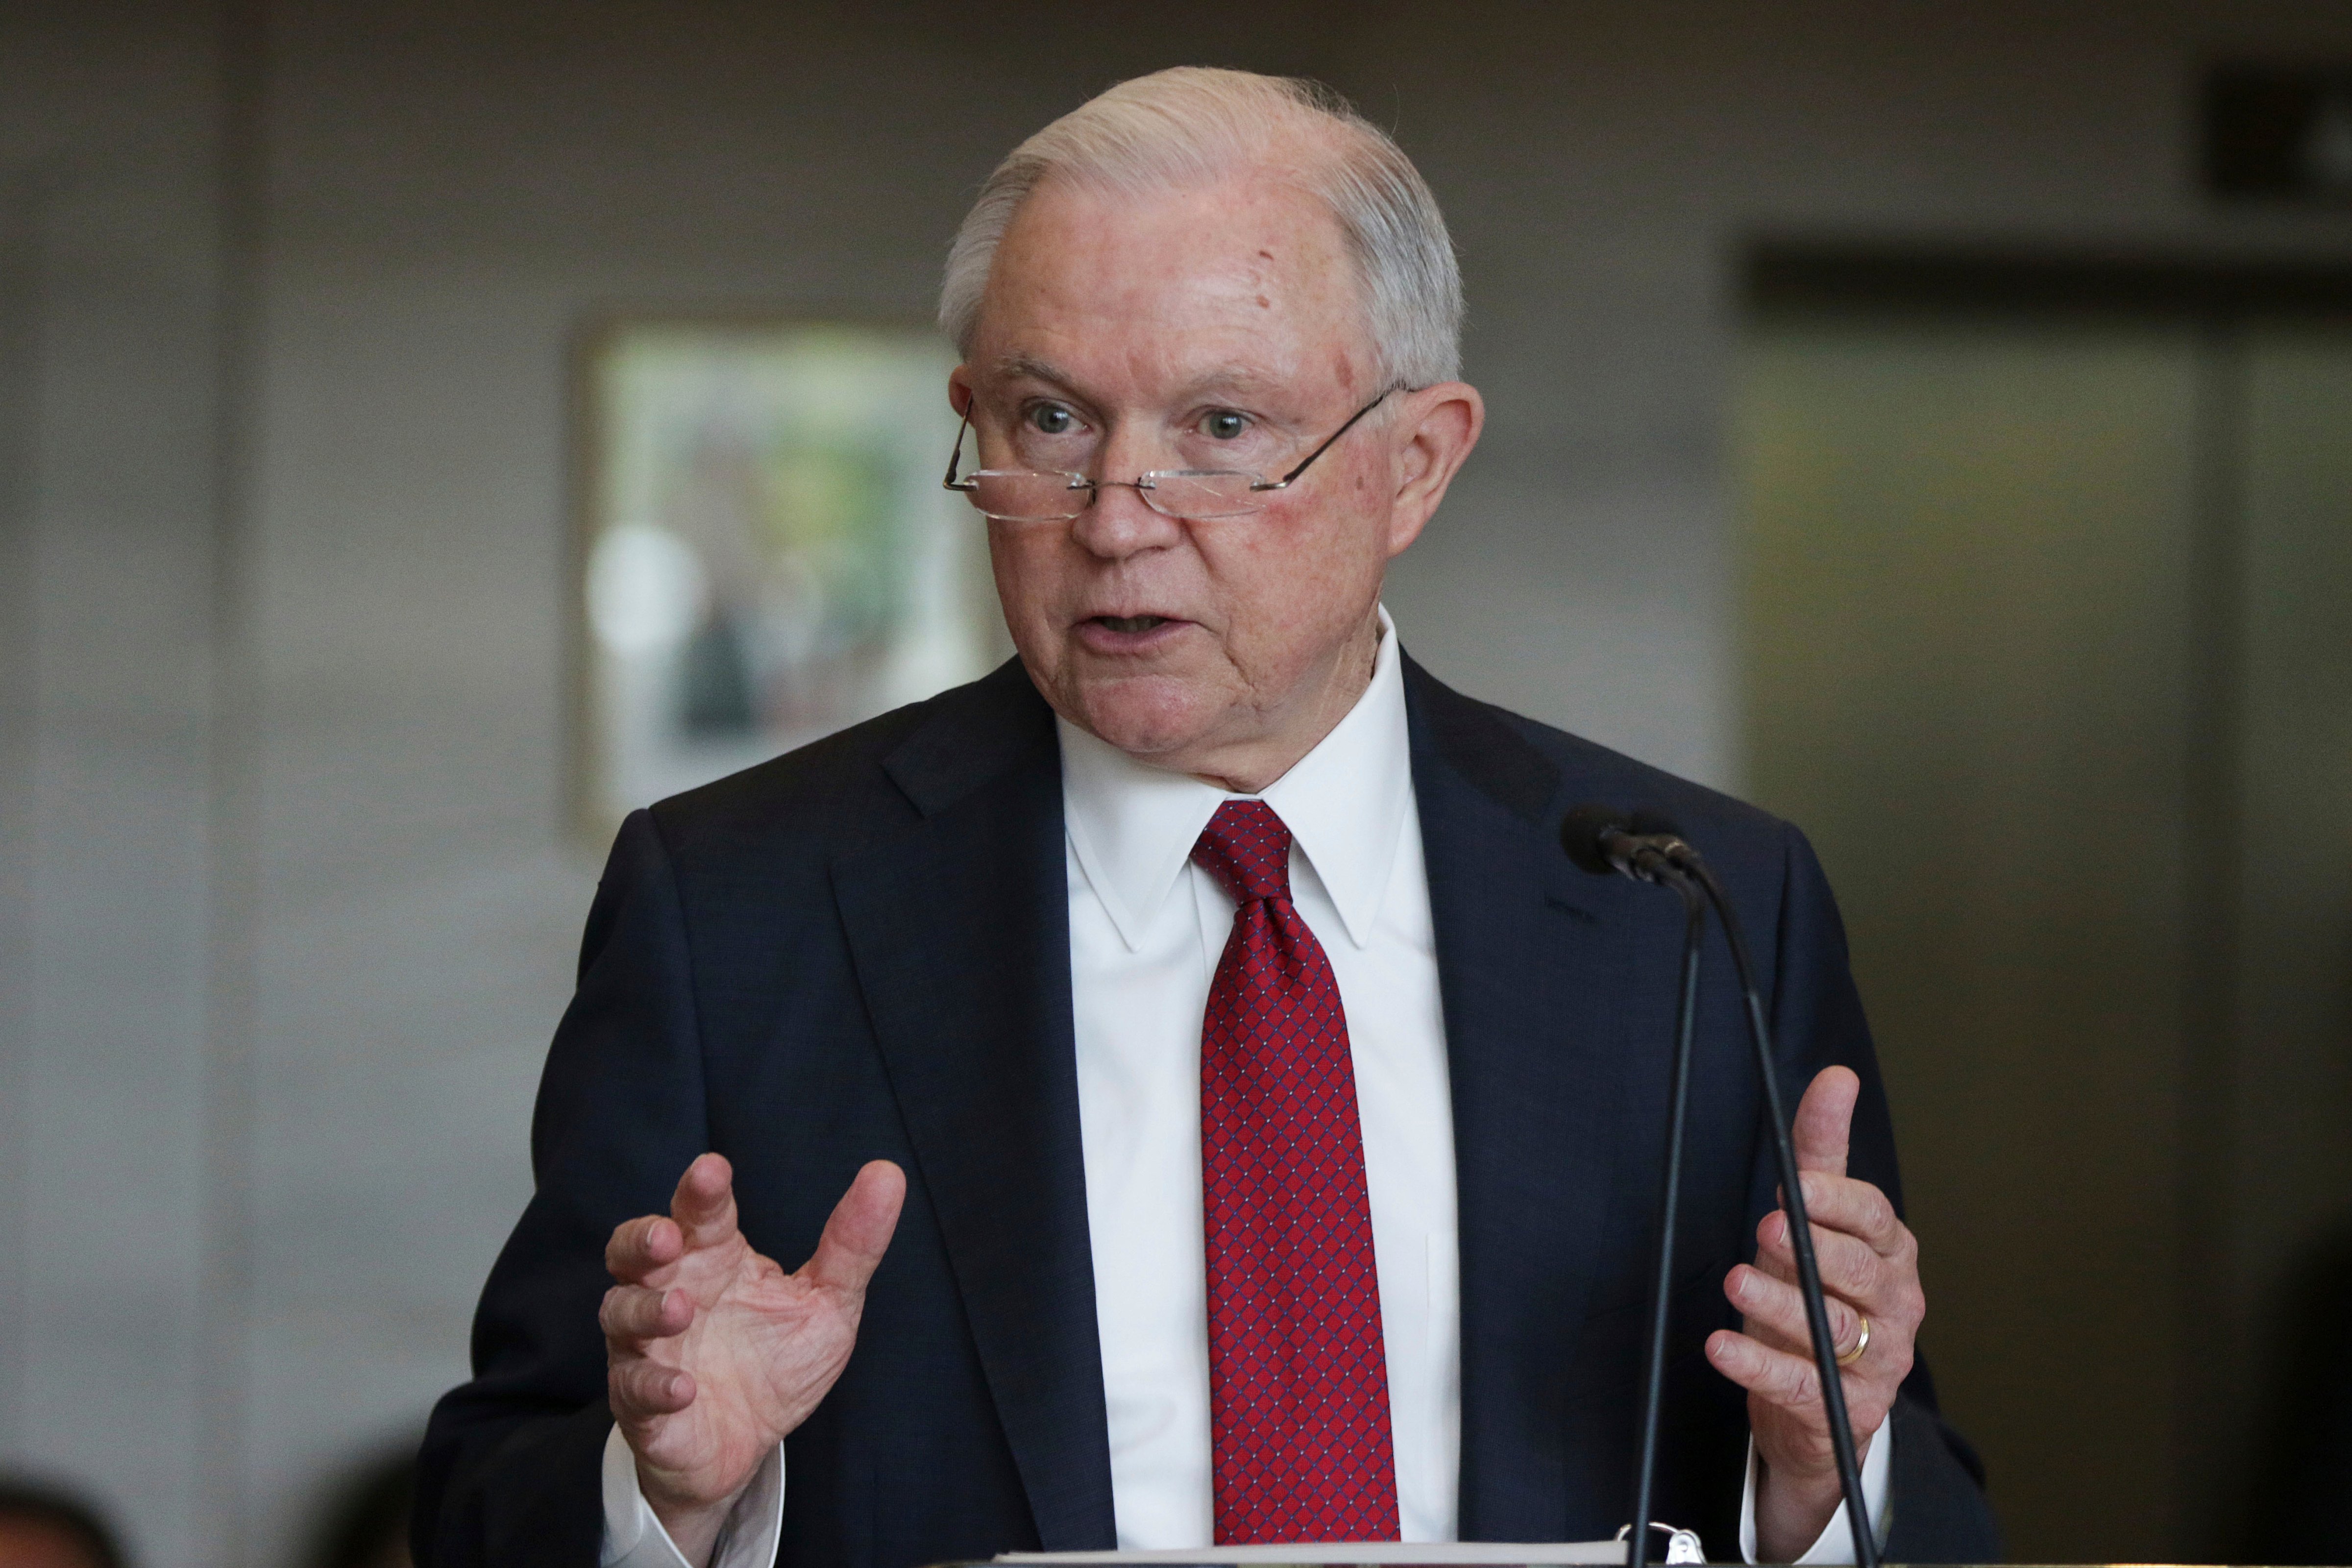 Jeff Sessions, Attorney General for the U.S. Department of Justice, speaks at the dedication for the United States Courthouse for the Southern District of Alabama in Mobile, Ala. on Sept. 7, 2018. (Dan Anderson—AP/REX/Shutterstock)